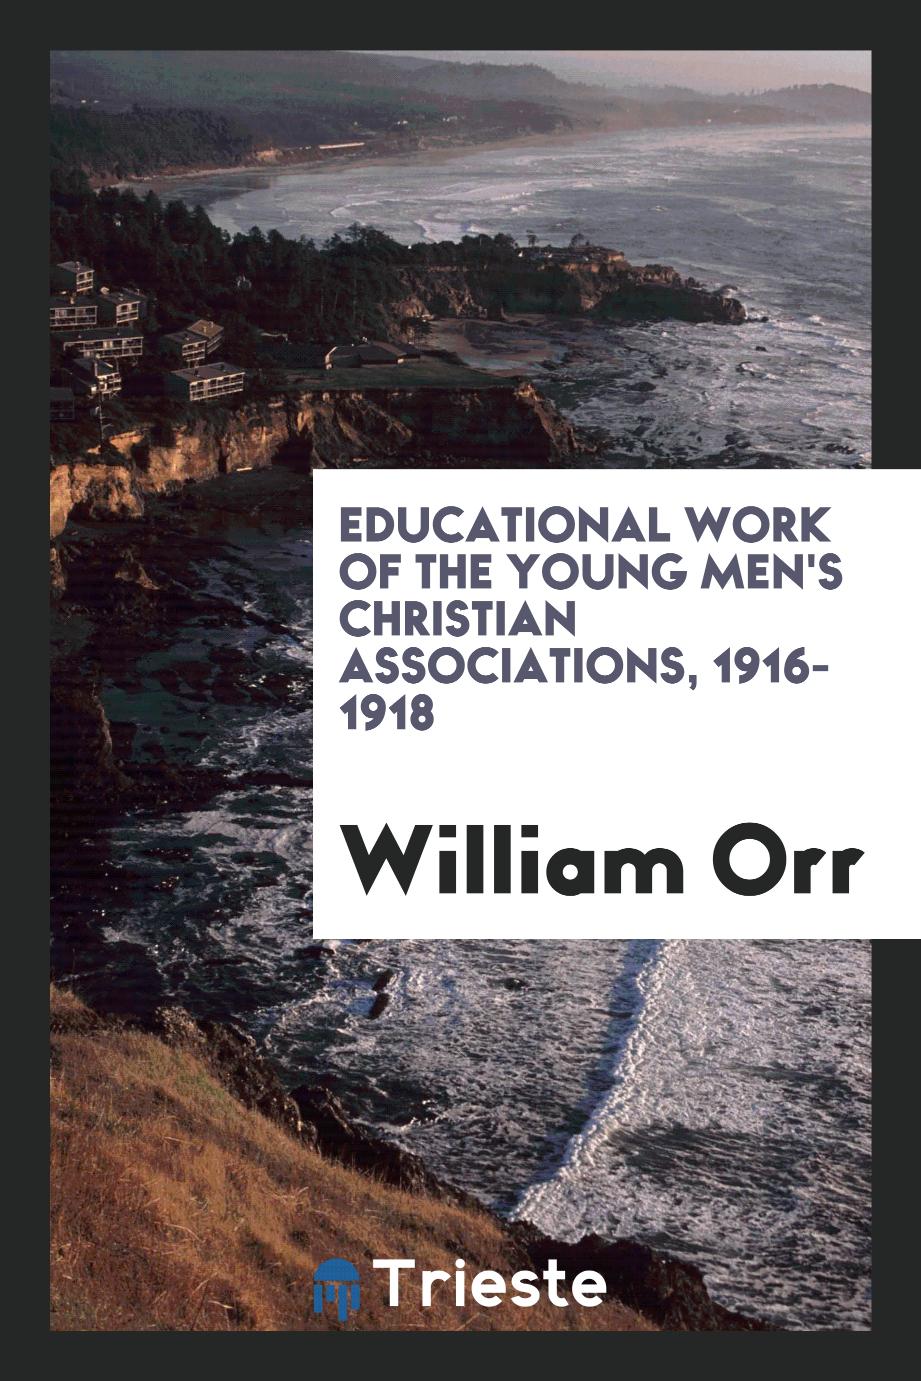 Educational Work of the Young Men's Christian Associations, 1916-1918